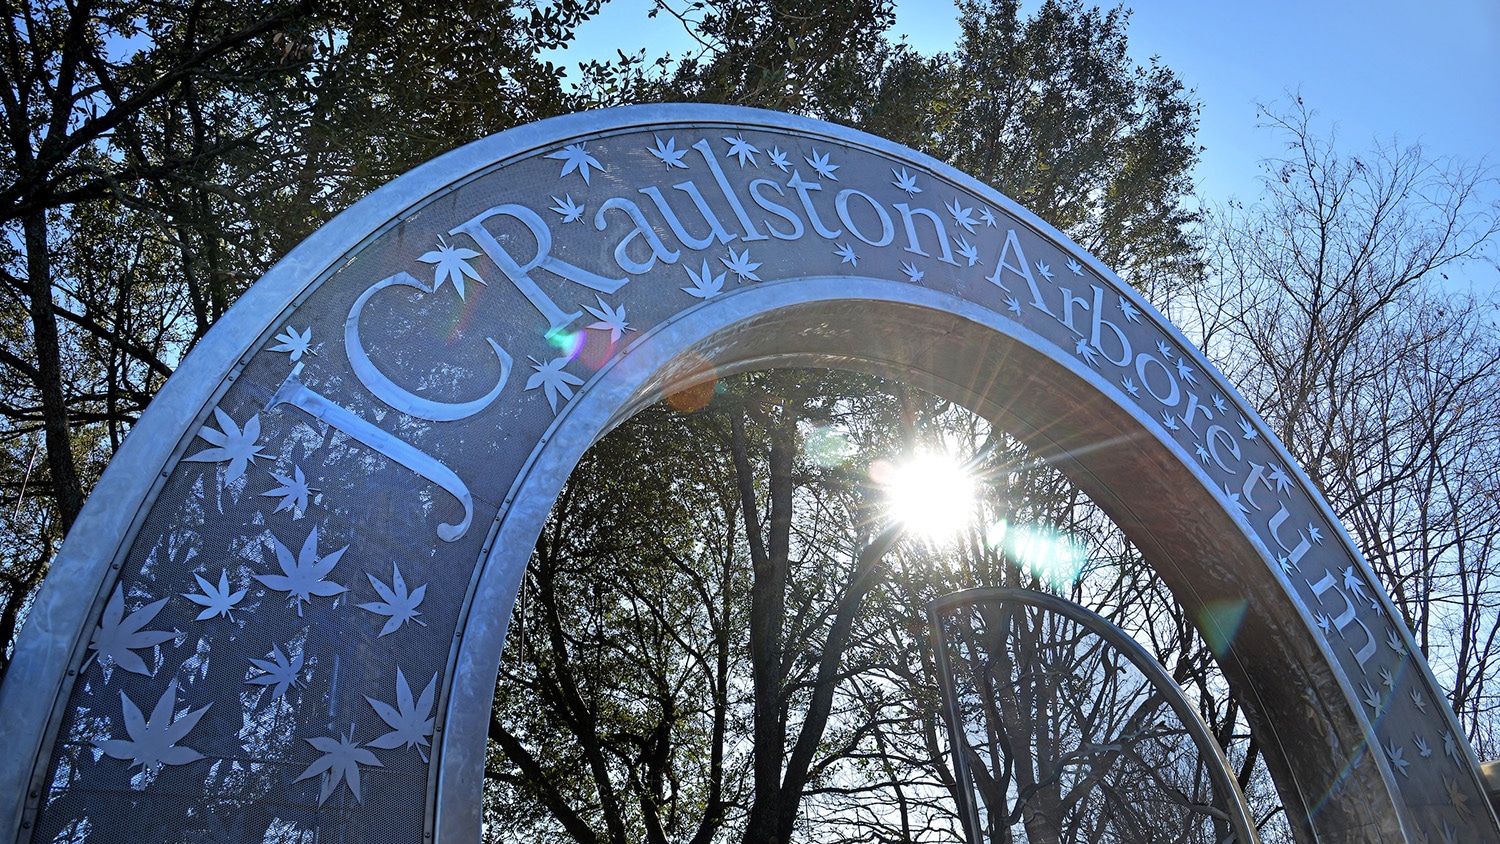 Silver gate to Raulston Arboretum, decorated with Japanese maple leaves.